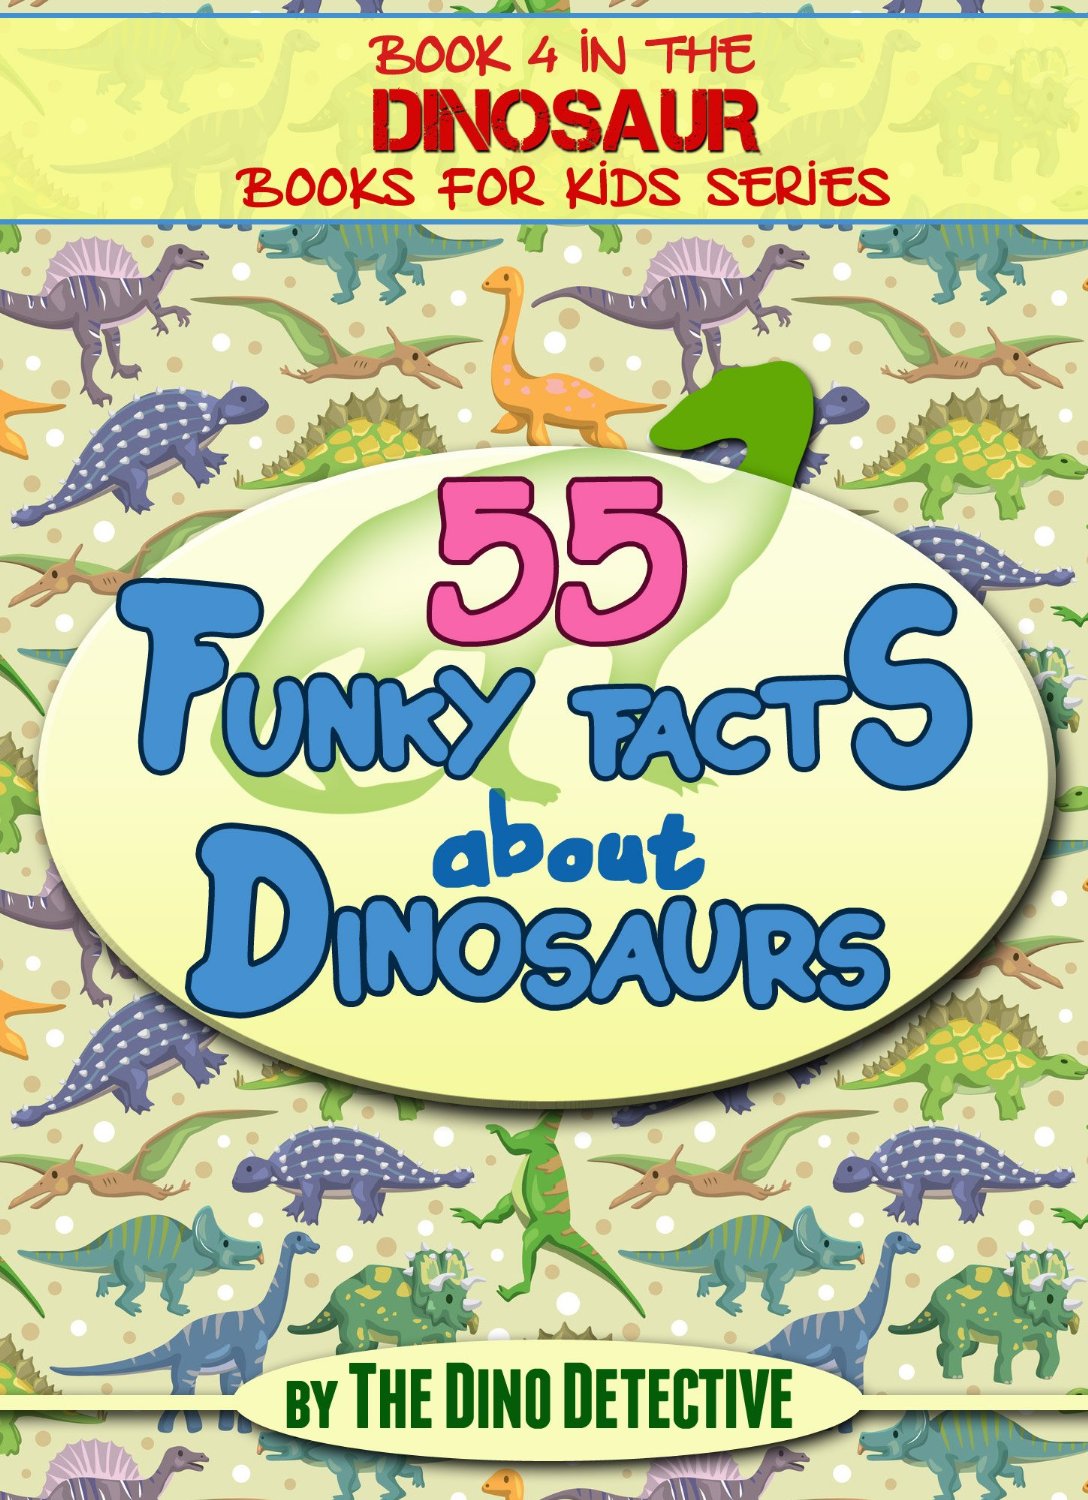 FREE: Dinosaur Books For Kids-55 Funky Facts About Dinosaurs by Barry Huhn